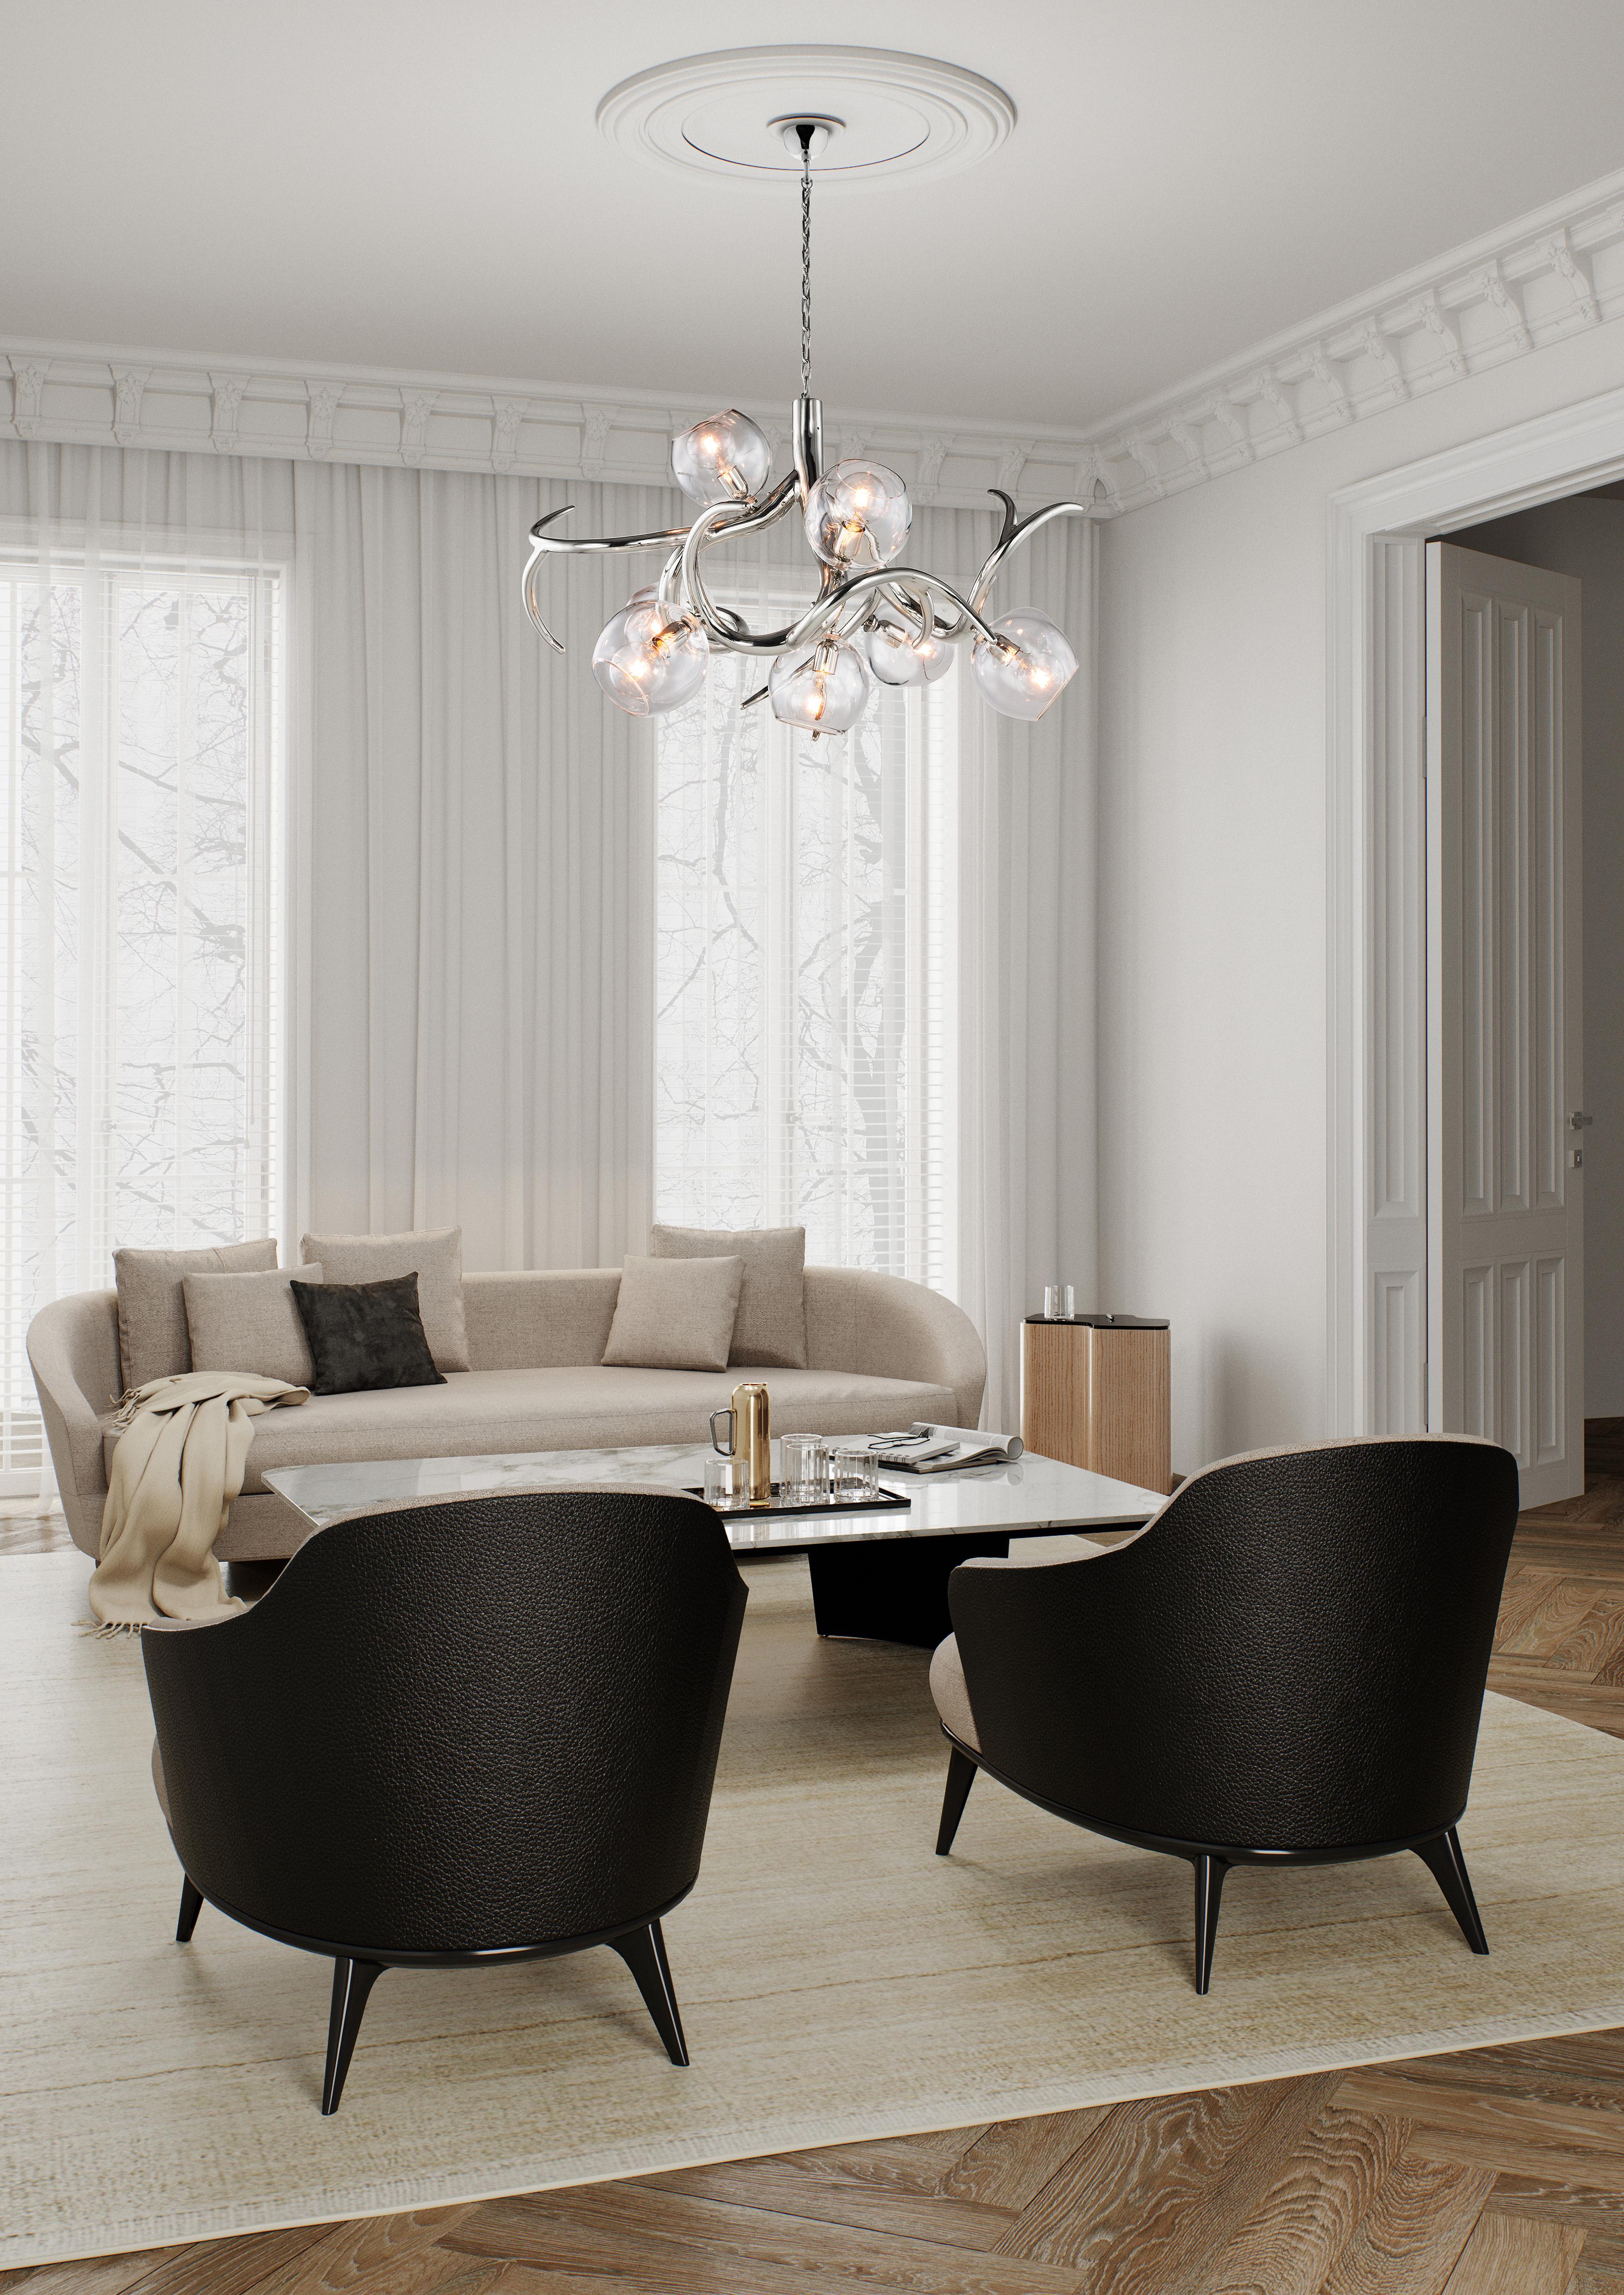 The Ersa, a modern chandelier in a black matte finish with glass spheres,, is designed by William Brand, founder of Brand van Egmond. Sculptural and full of character, the chandelier is available in three different models round, conical, and oval.